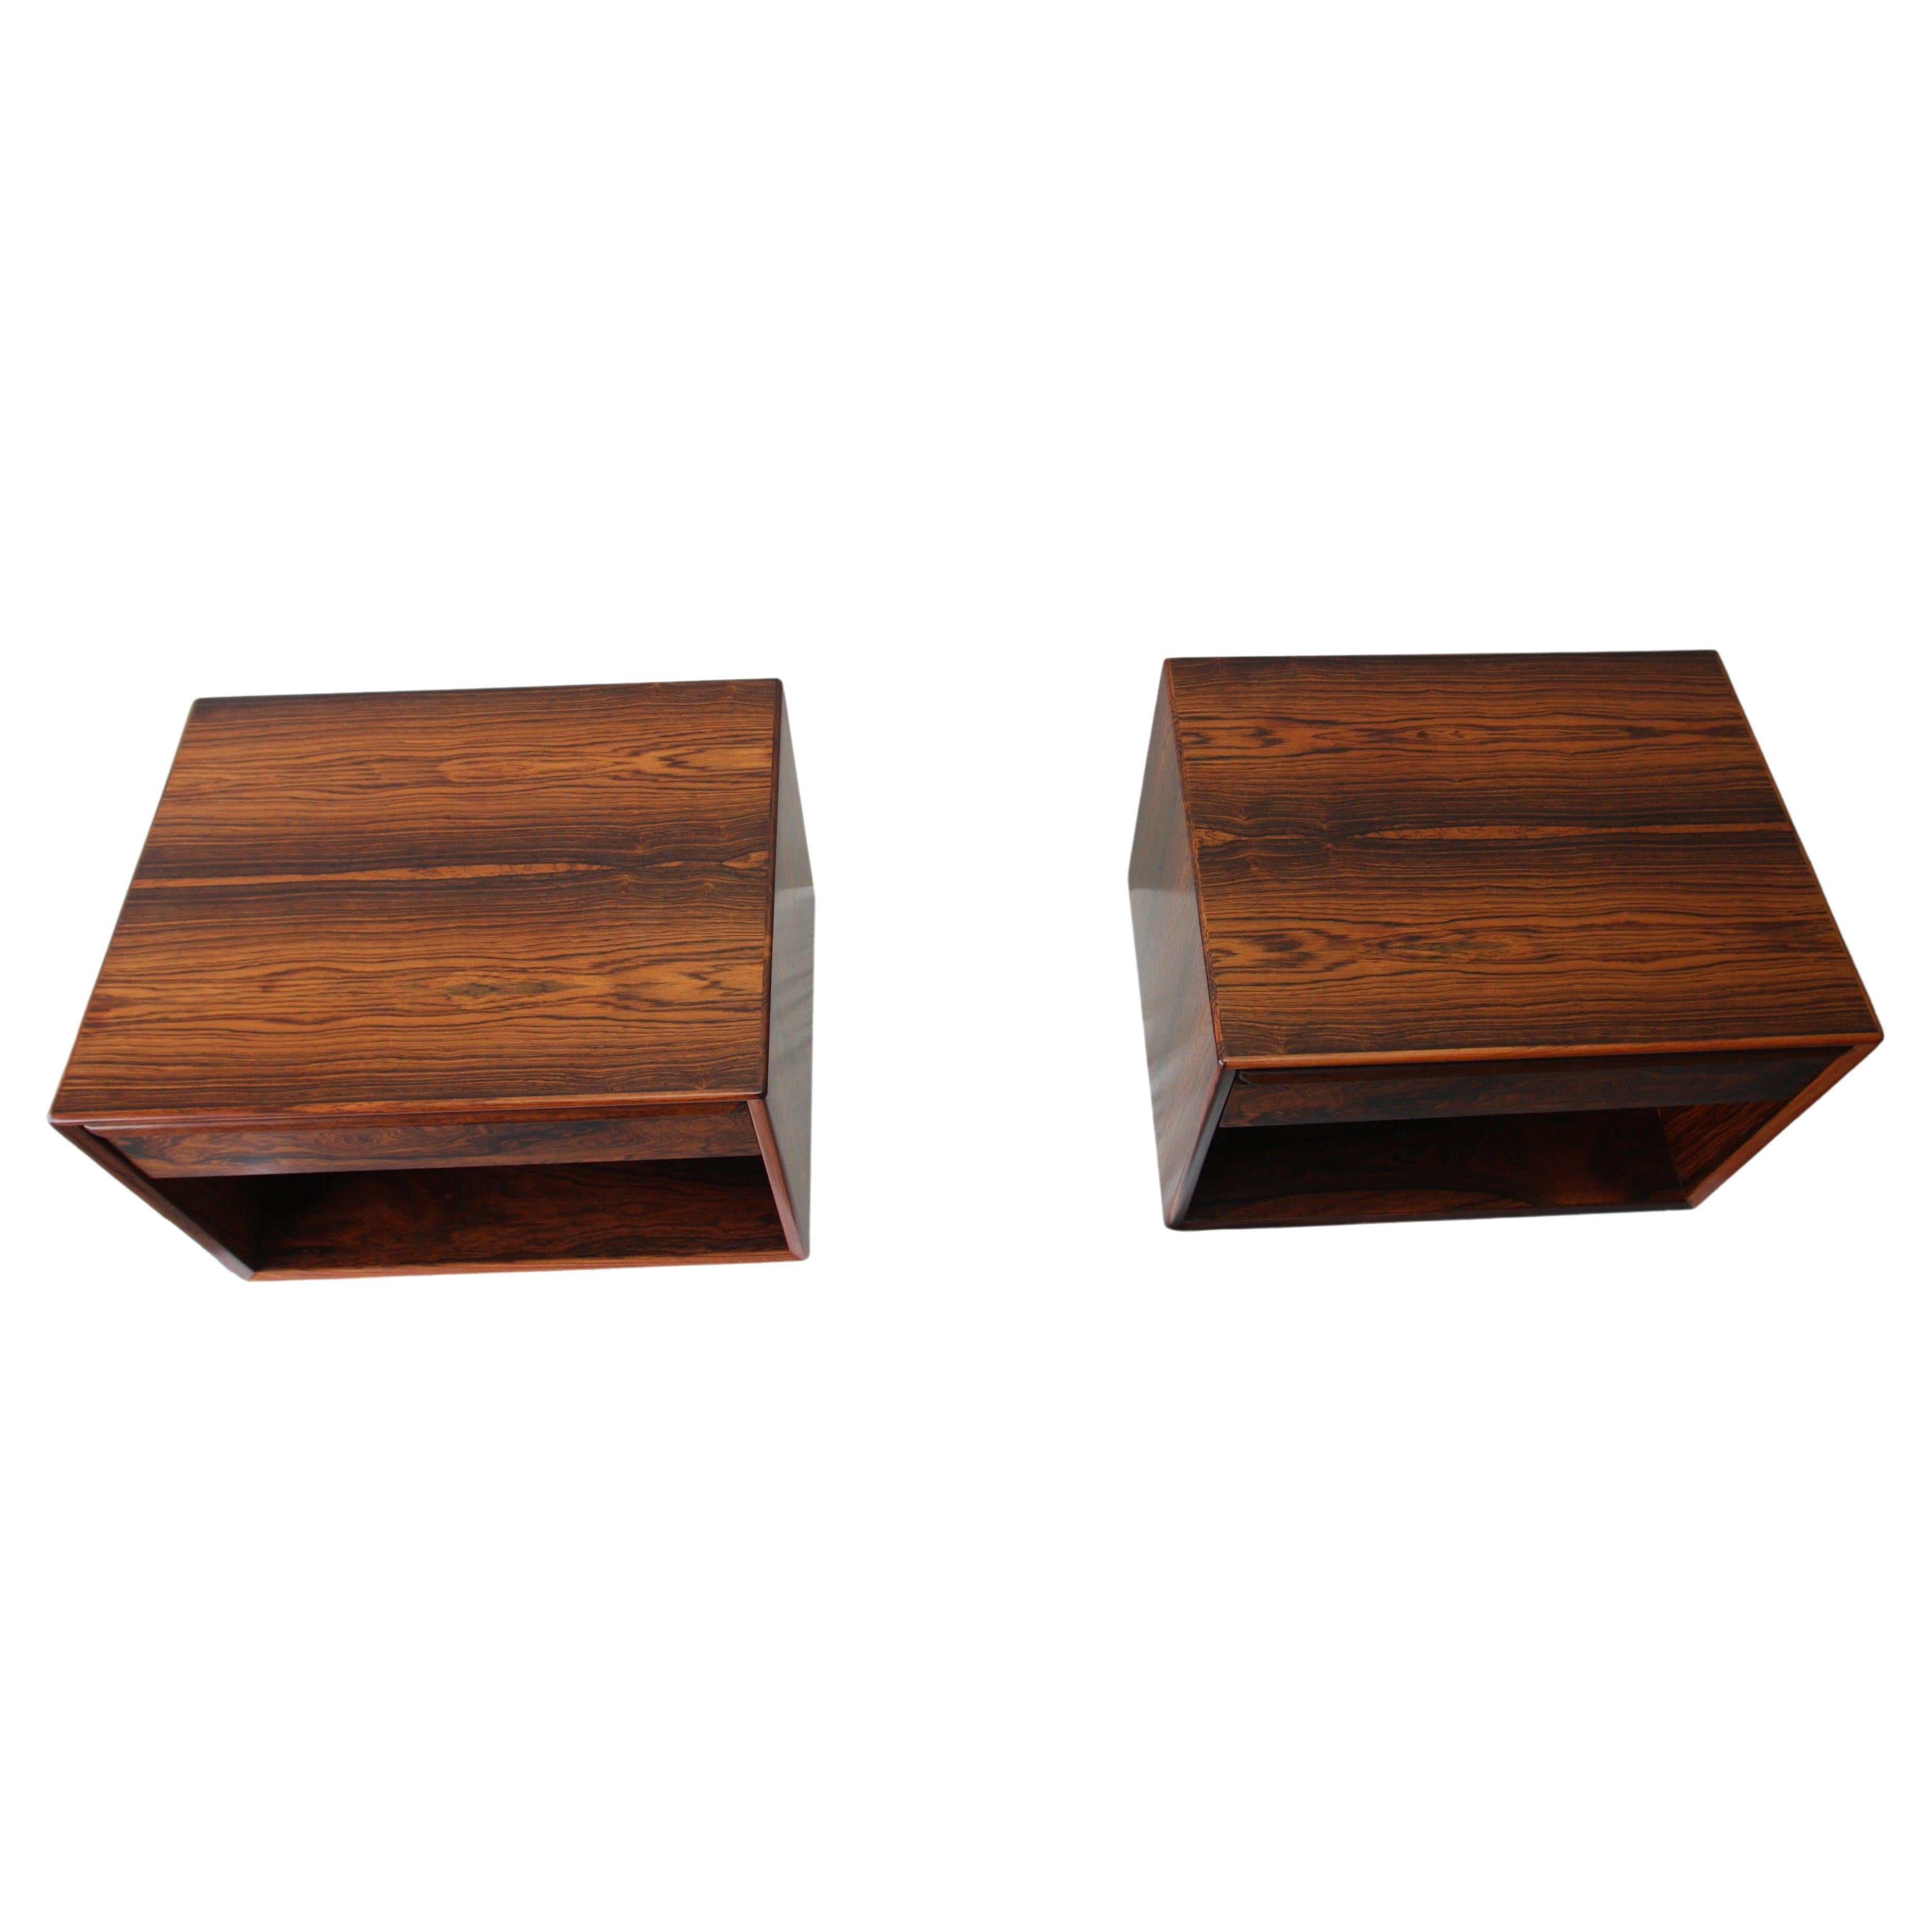  Set of Two Fully Restored Westnofa Danish Floating Rosewood Nightstands In Good Condition For Sale In Las Vegas, NV